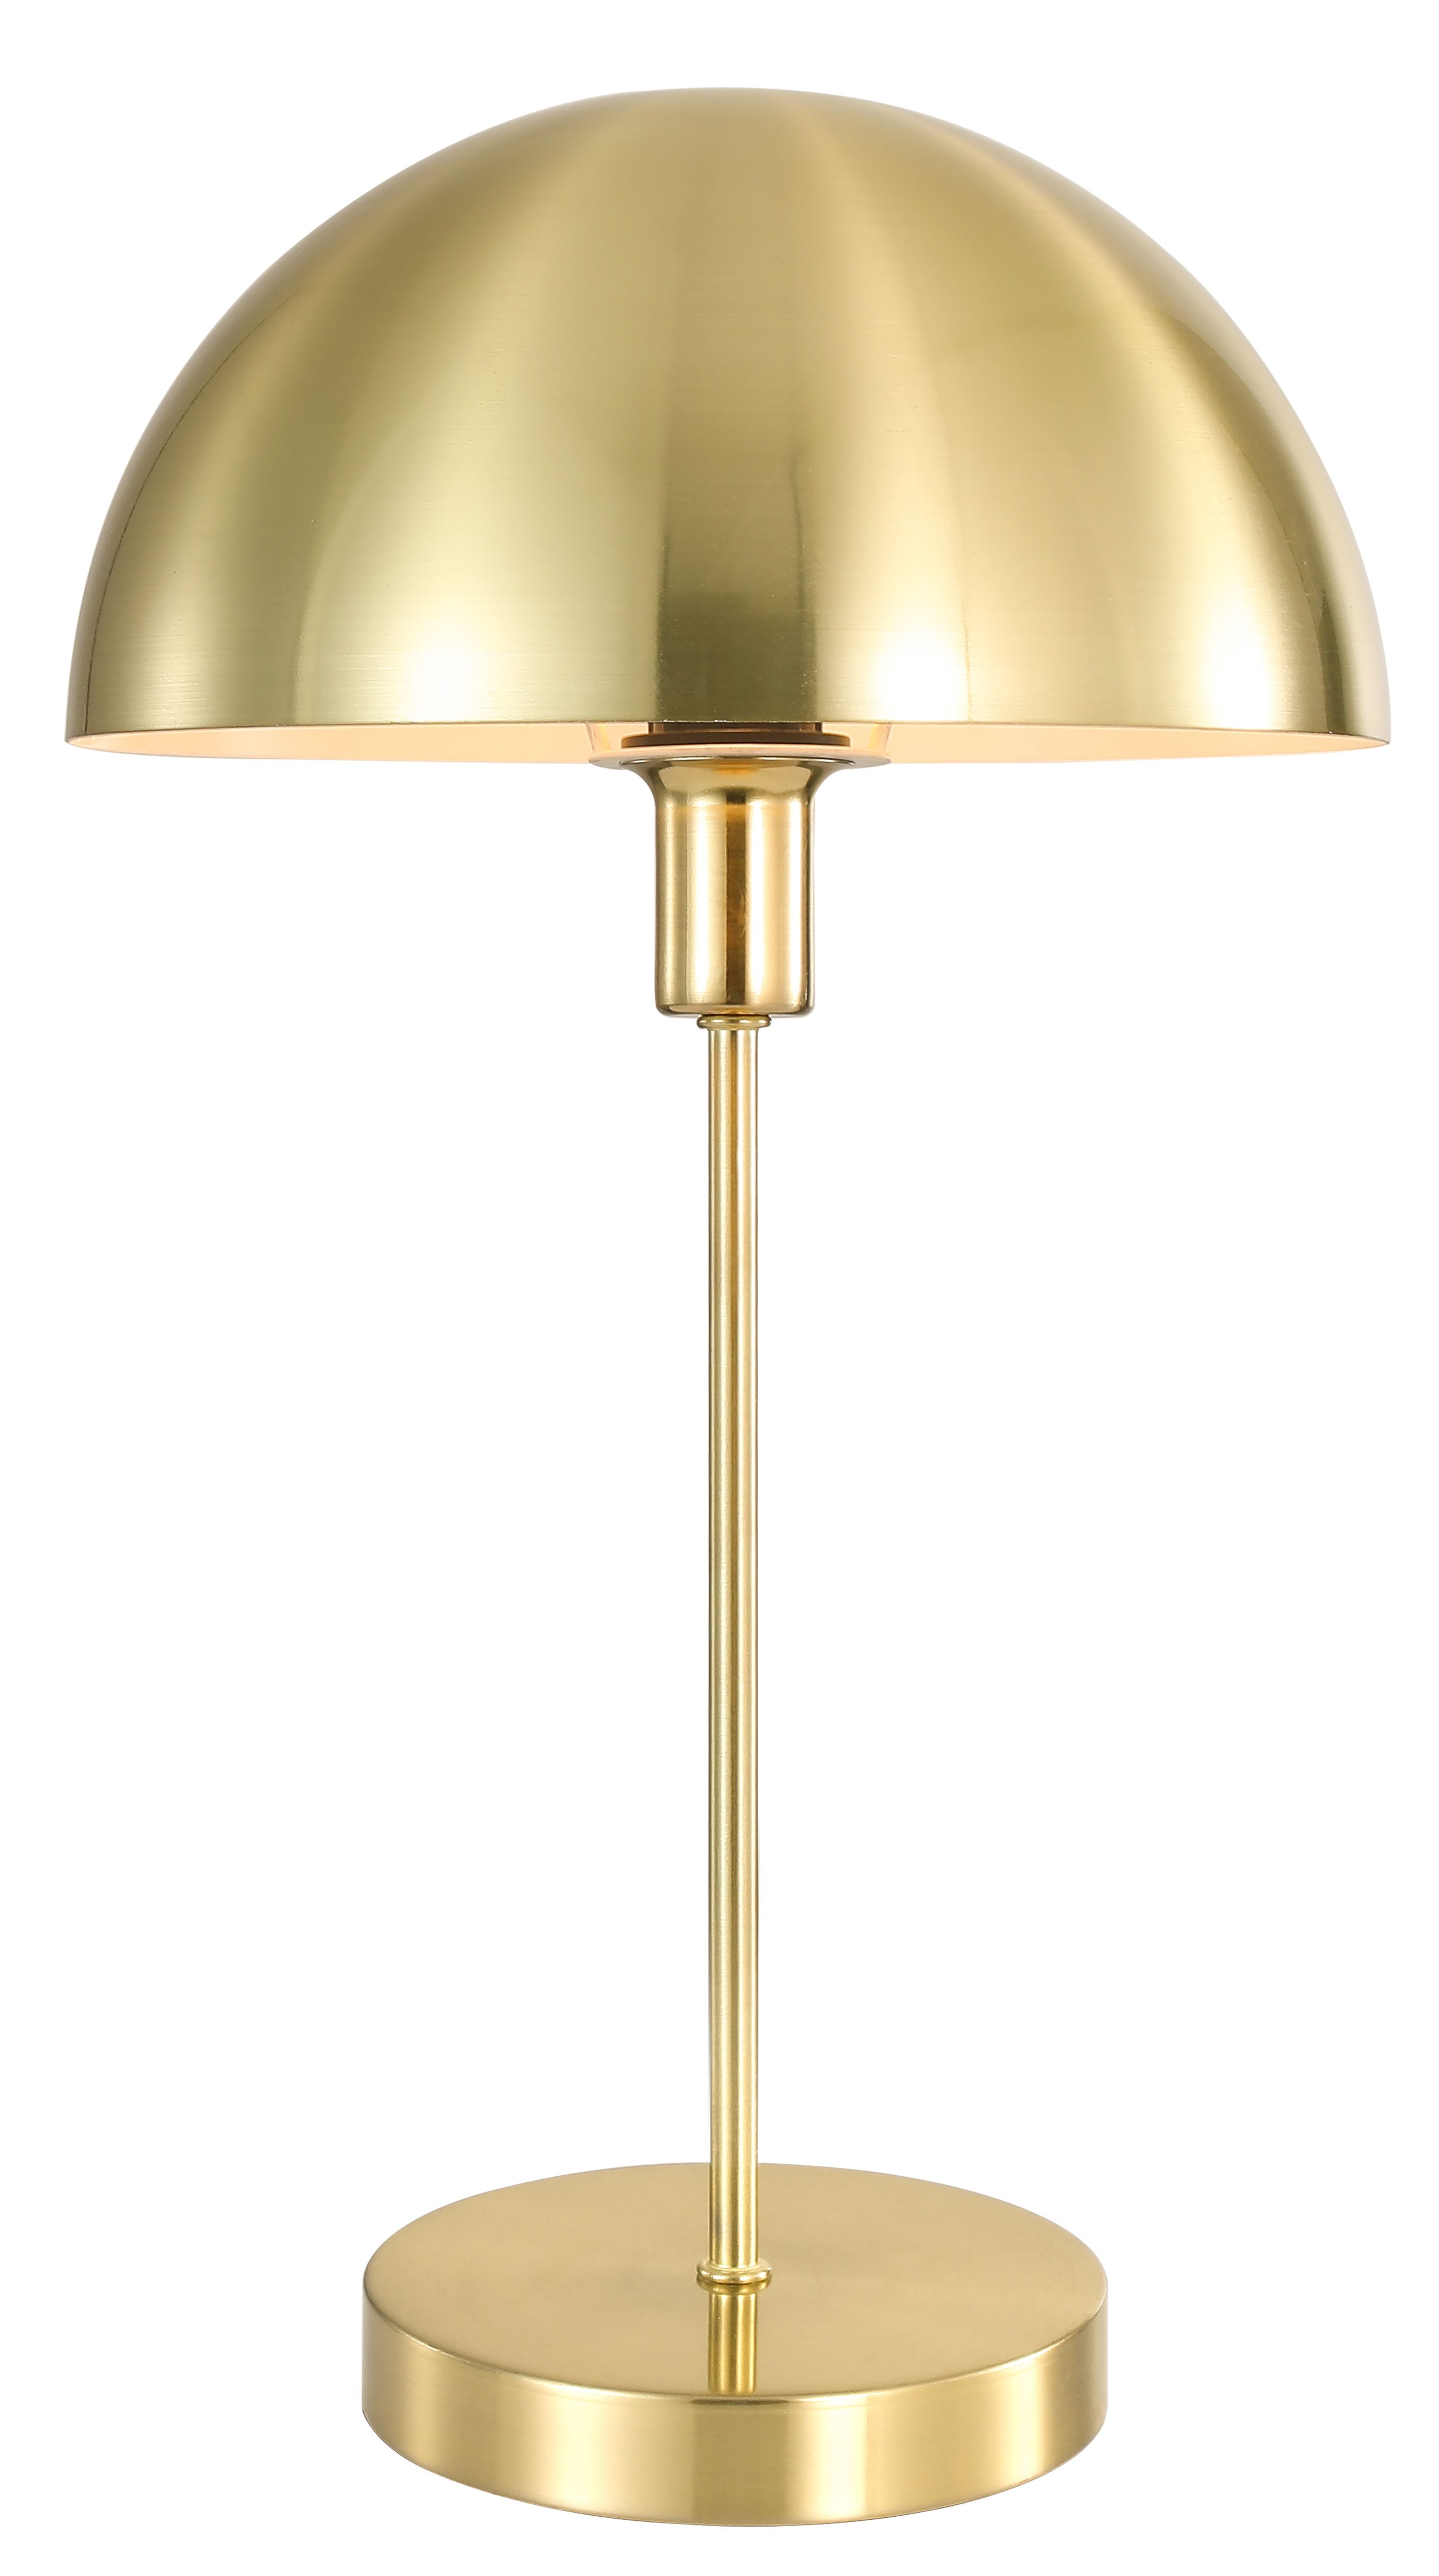 GoodHome Songor Brushed Brass effect Eco halogen Round Table lamp